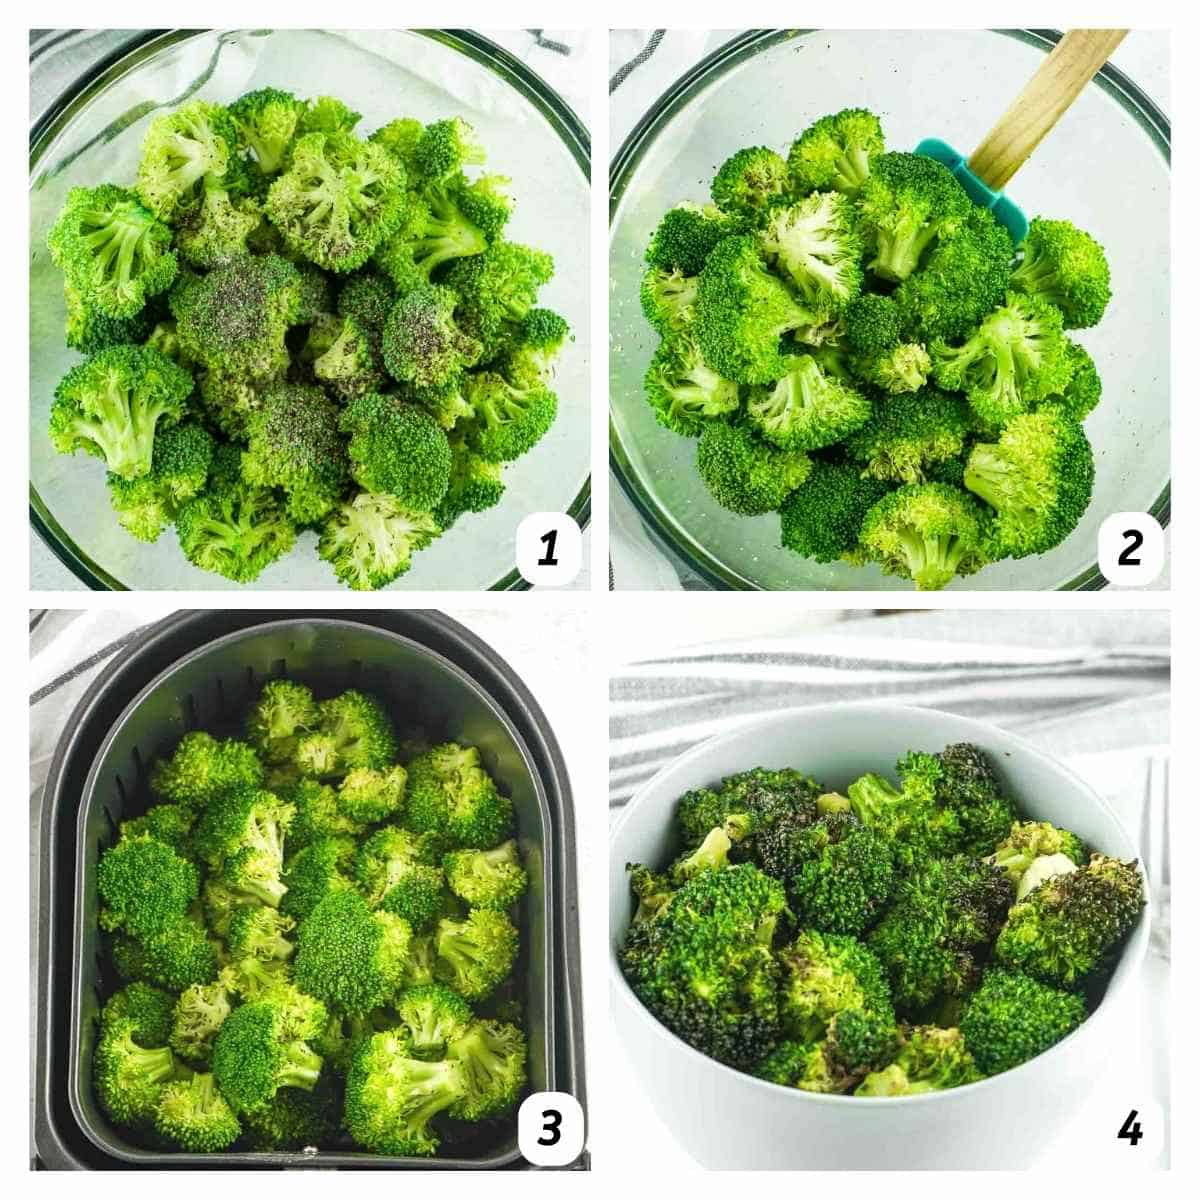 Four panel grid of process shots - combining ingredients and cooking in the air fryer.